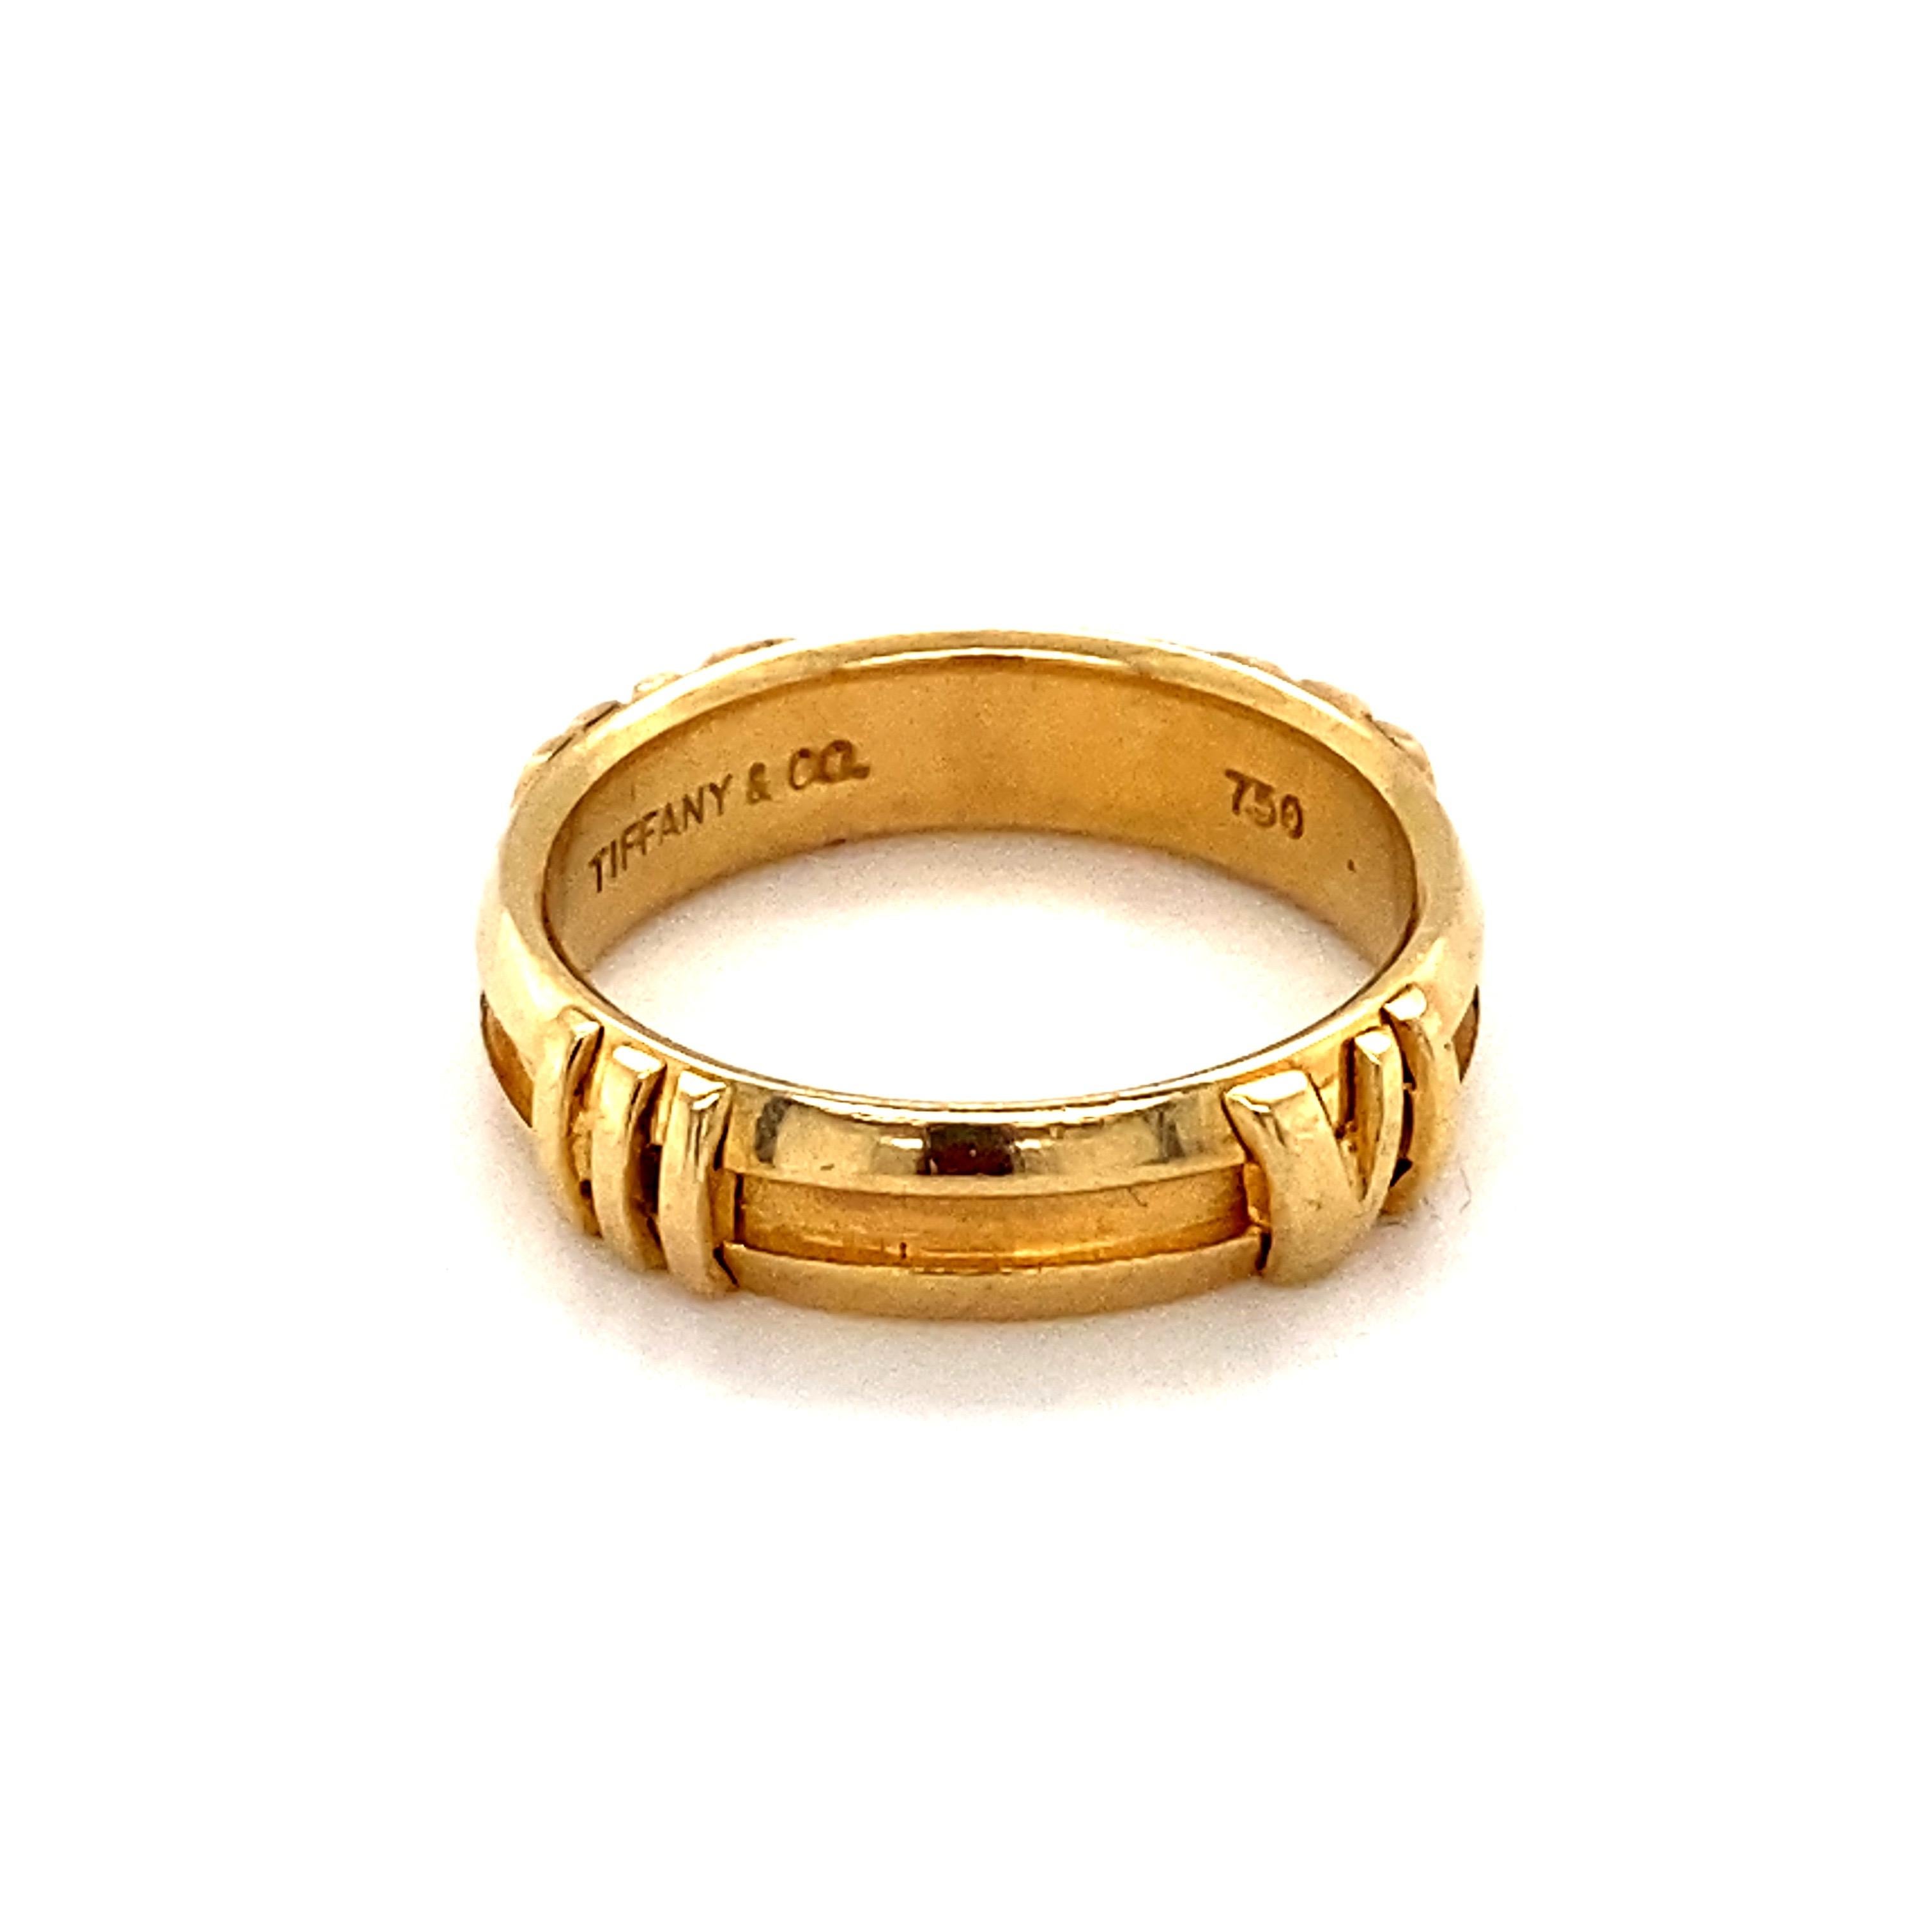 This beautiful gold band by famed jewelry company Tiffany & Co is part of the Atlas collection. Designed with Roman numerals and brushed gold, this band is a stunning piece that can be worn by all genders. It is stamped with 750 and the maker's